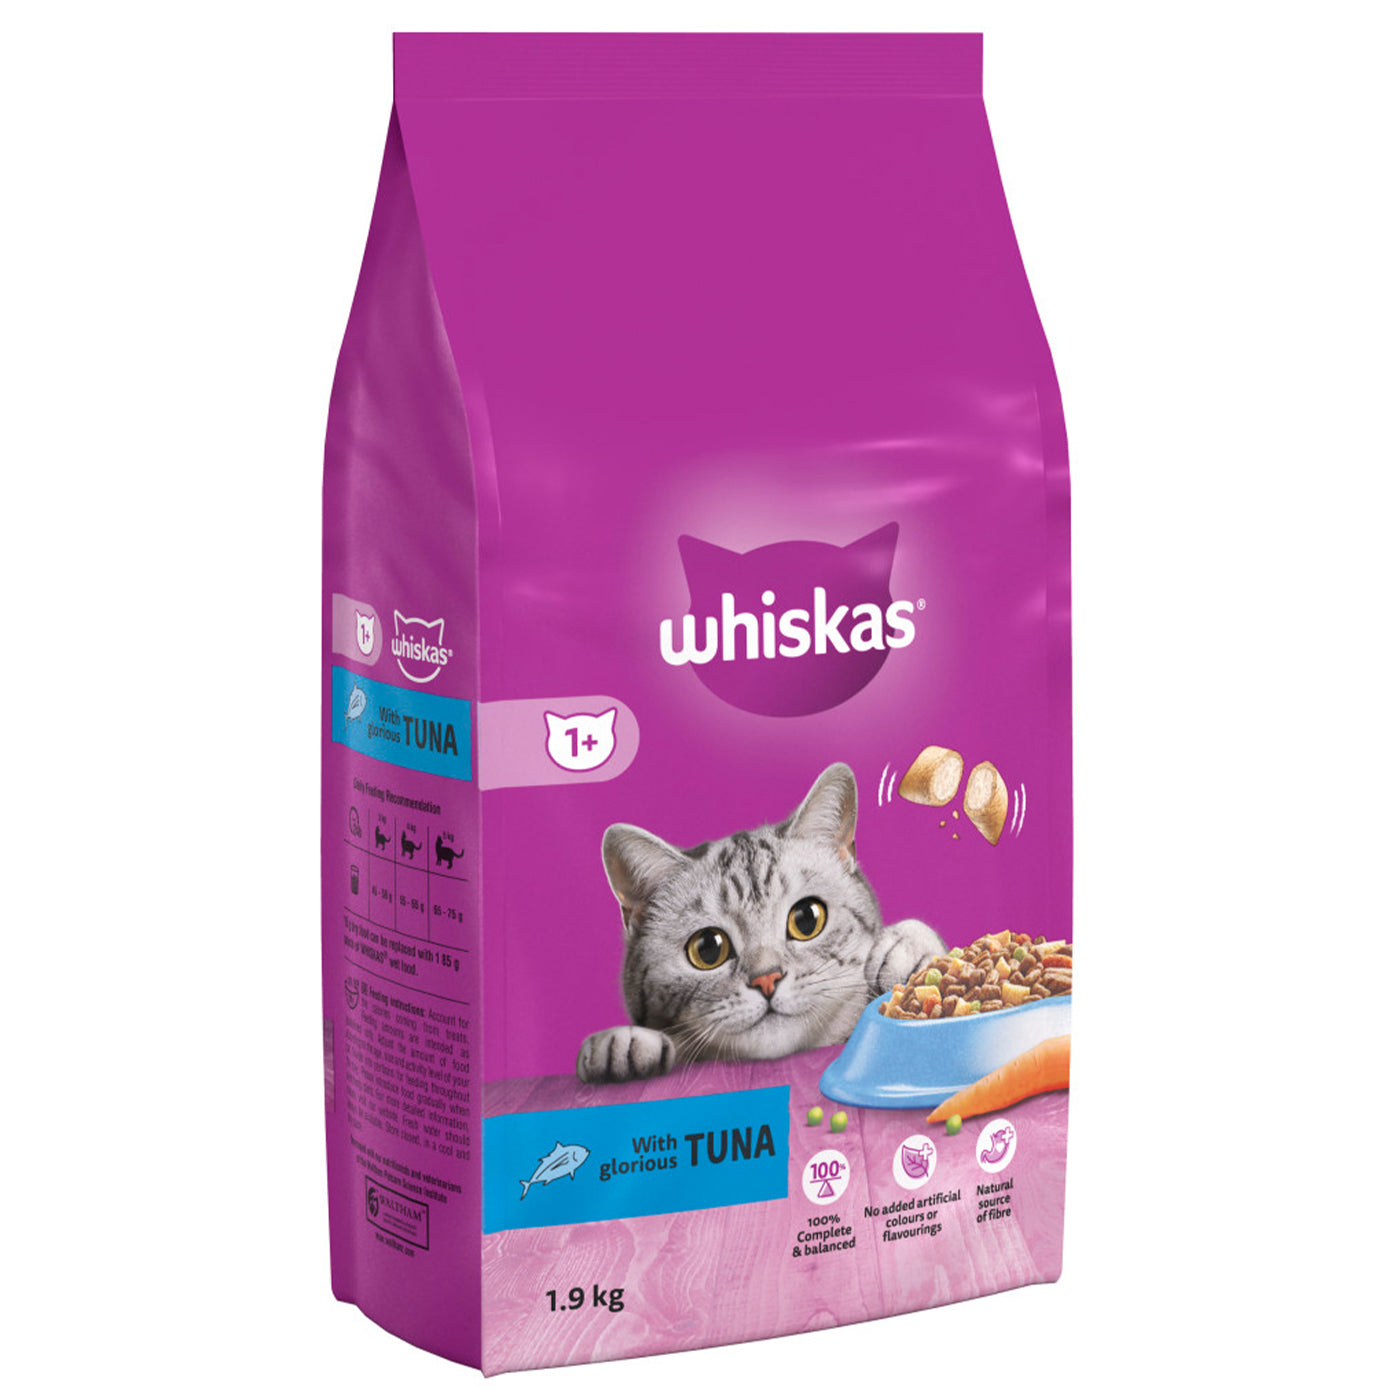 Whiskas 1+ Cat Complete Dry Food with Tuna